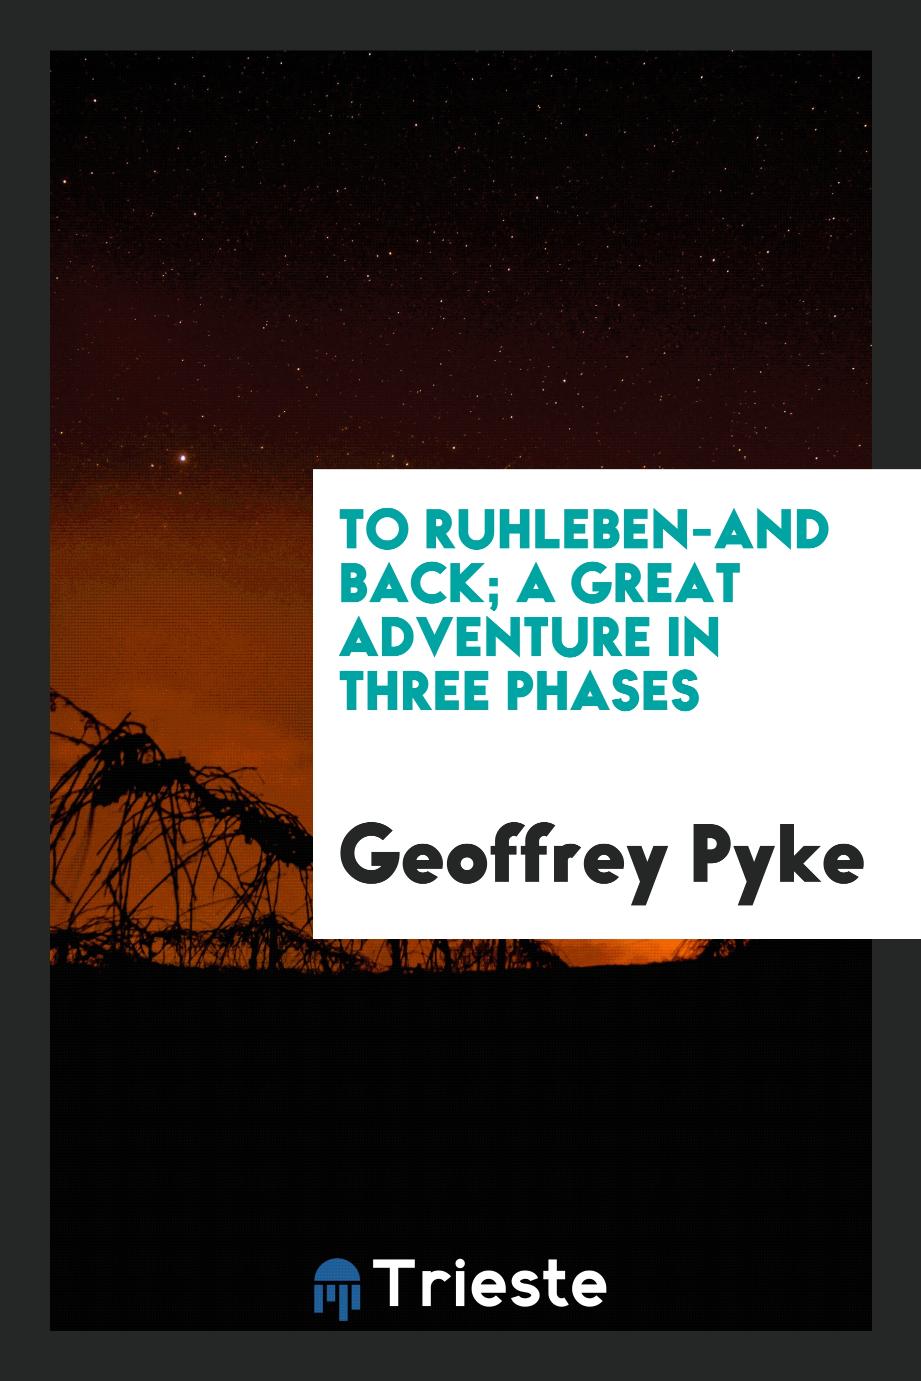 To Ruhleben-and back; a great adventure in three phases